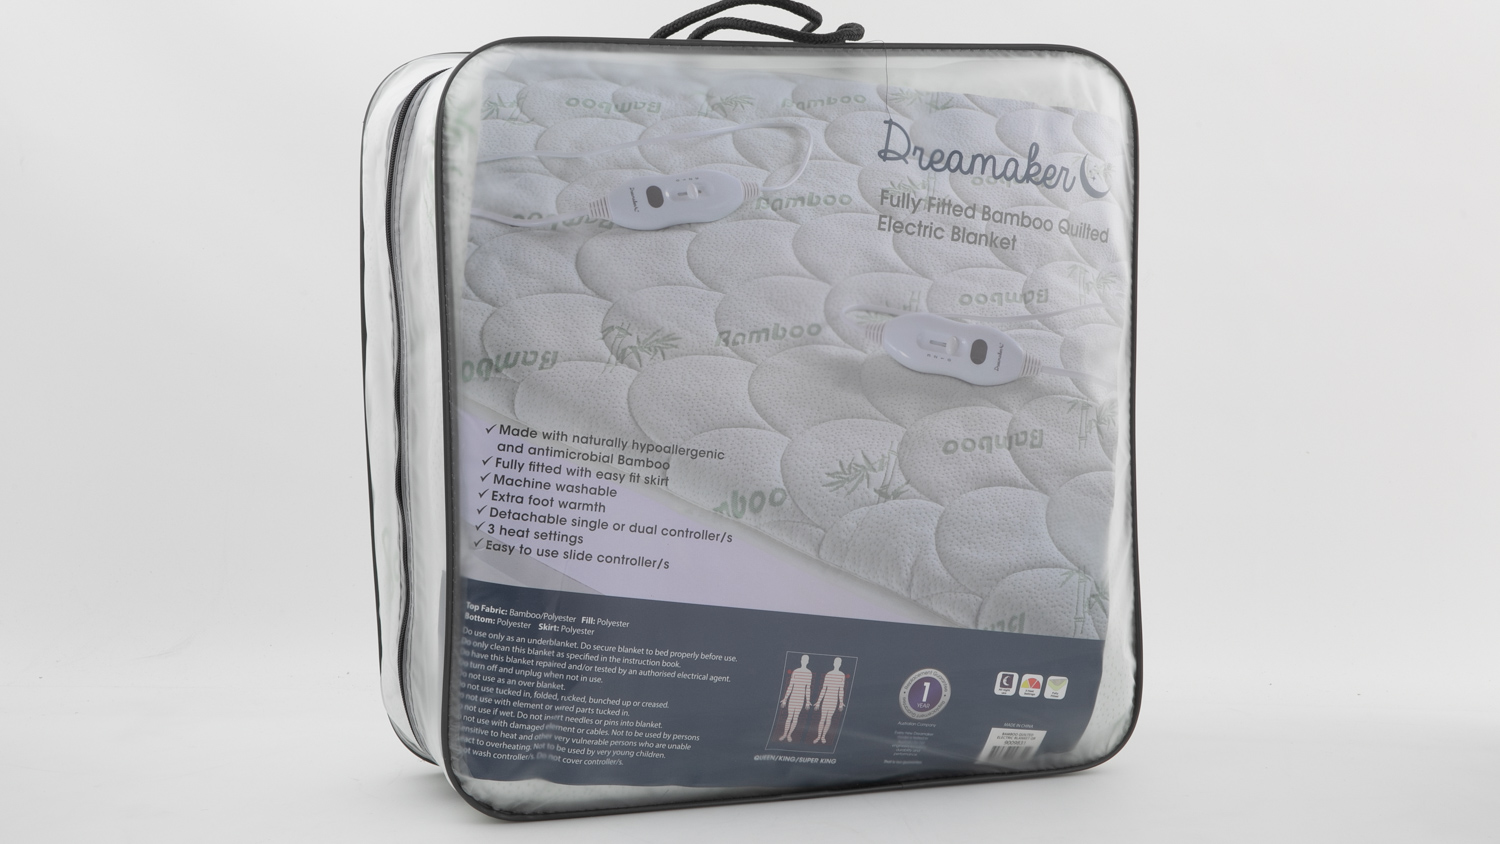 Dreamaker Fully Fitted Bamboo Quilted Electric Blanket TH203x152-2XC/9009831 carousel image